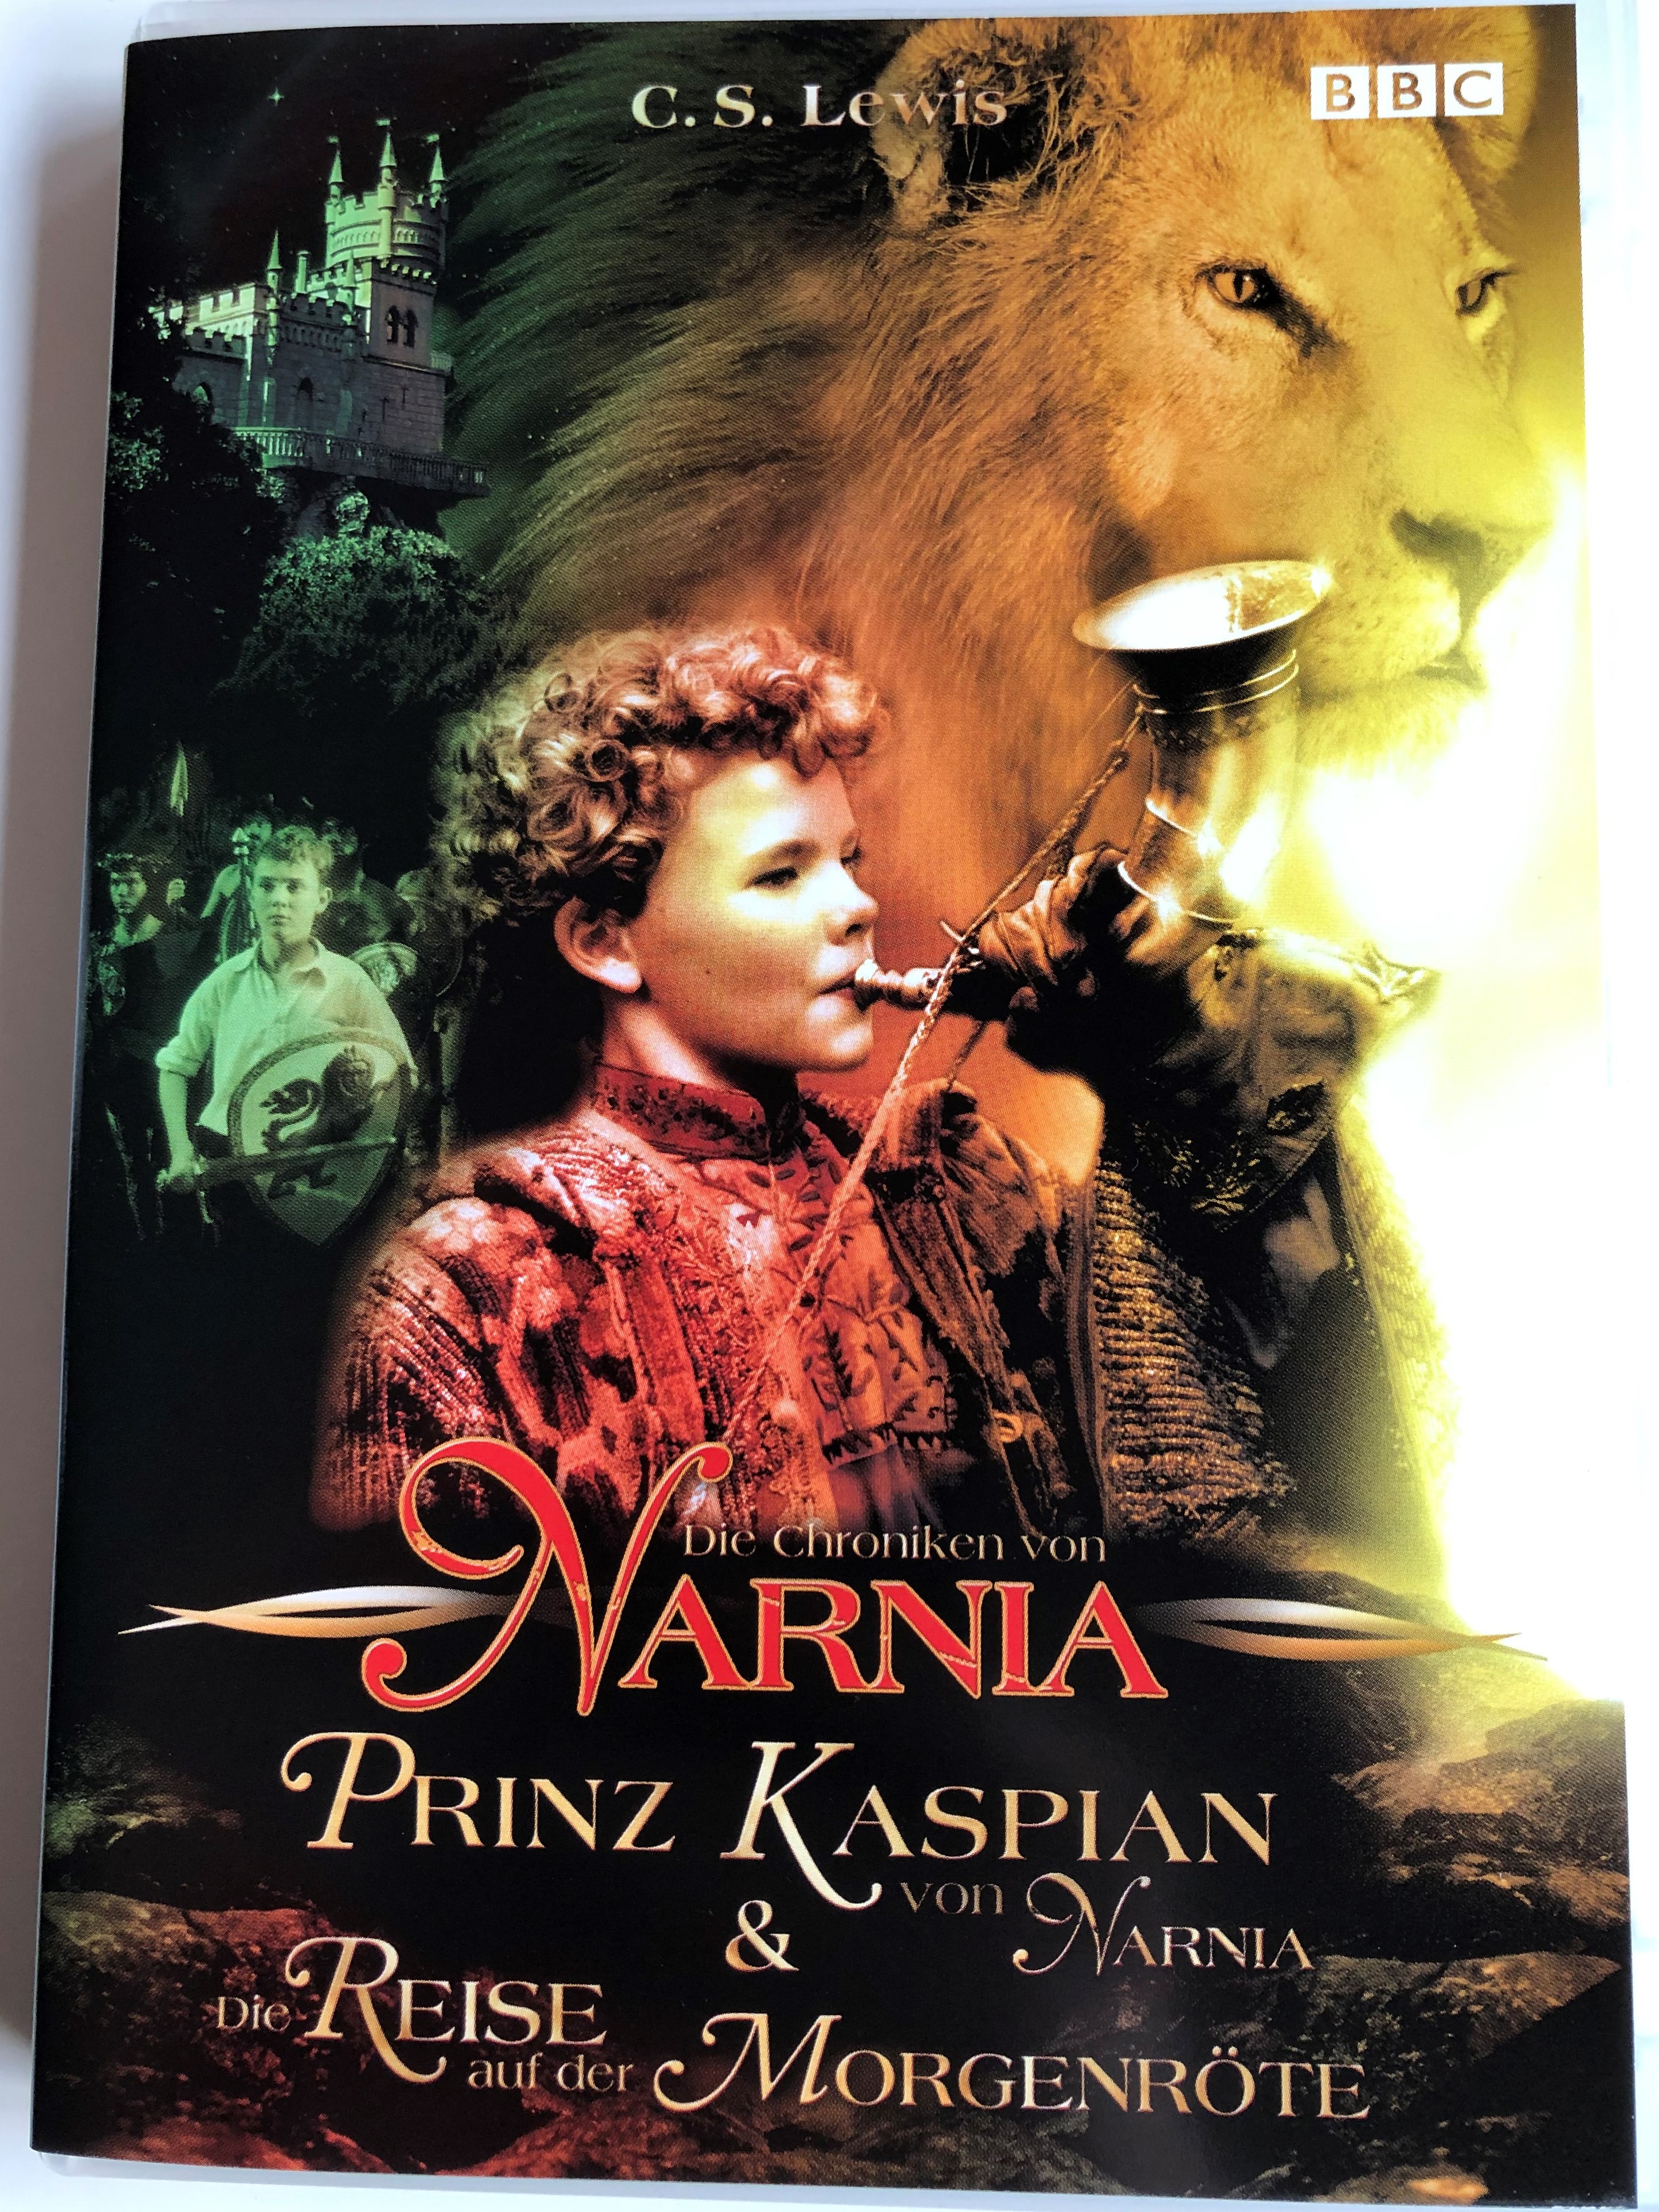 the-chronicles-of-narnia-prince-caspian-the-voyage-of-the-dawn-treader-dvd-2010-1.jpg